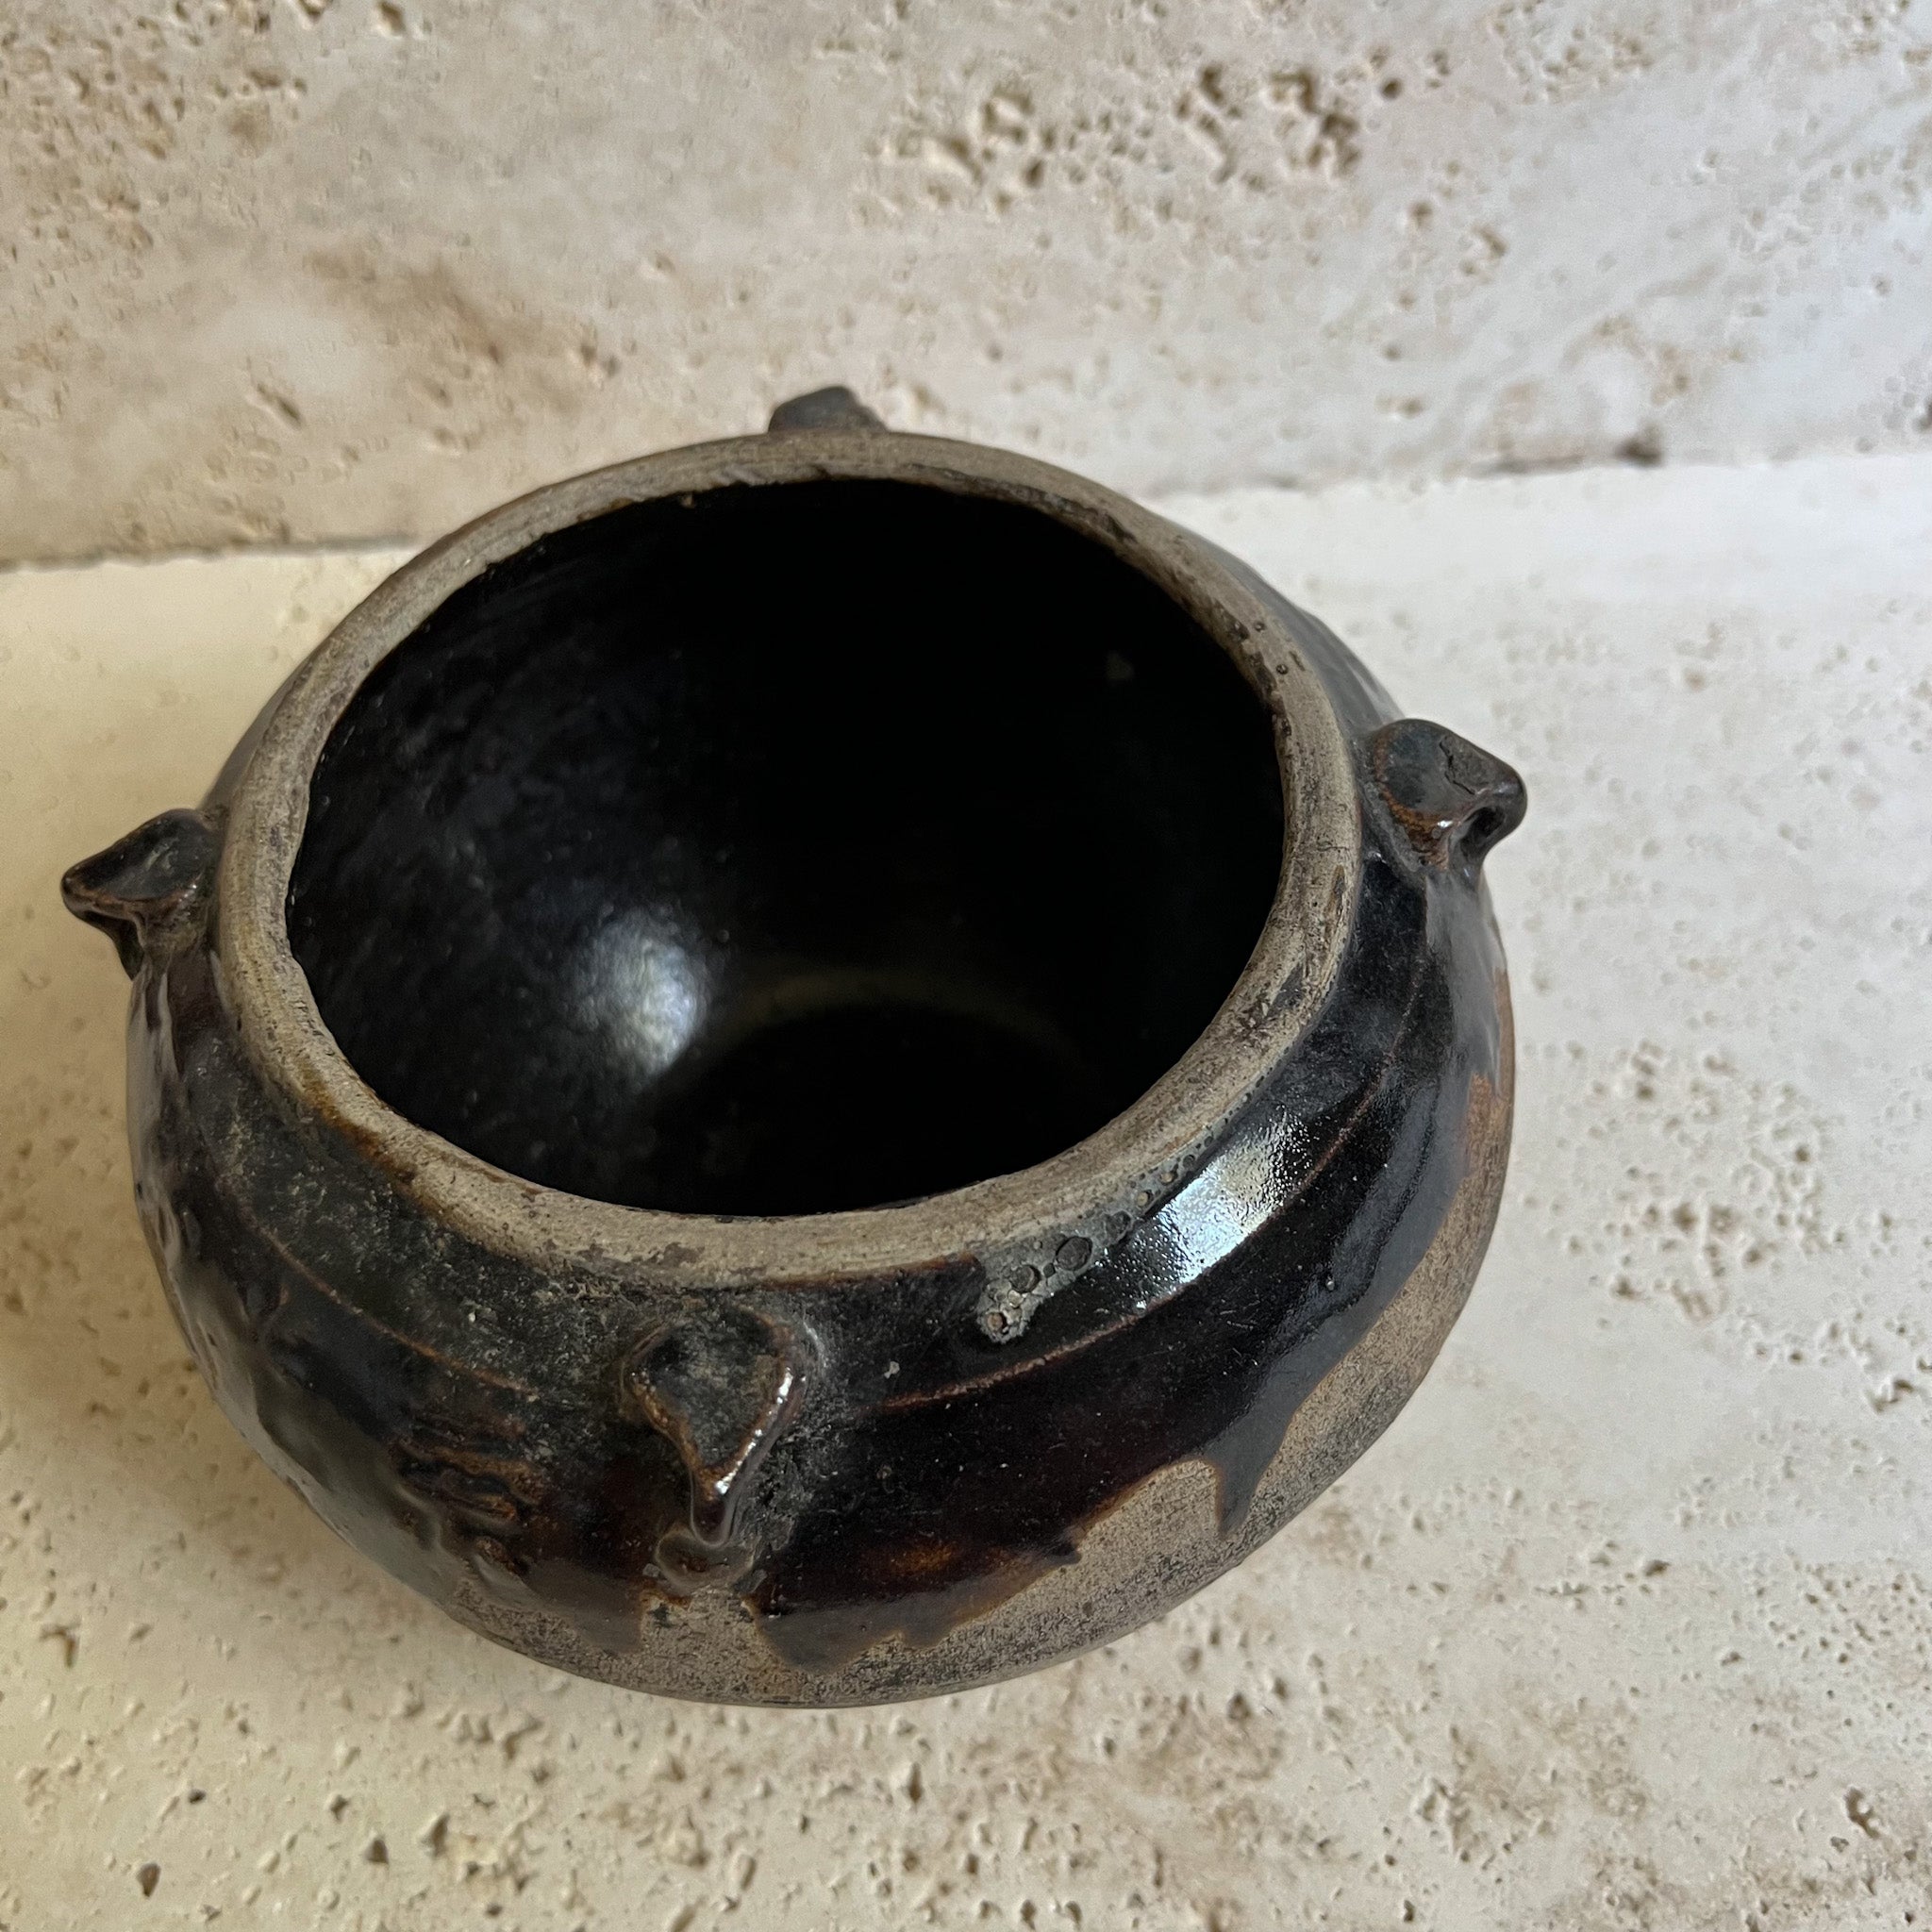 Antique brown Chinese pot that sits on a travertine stone.